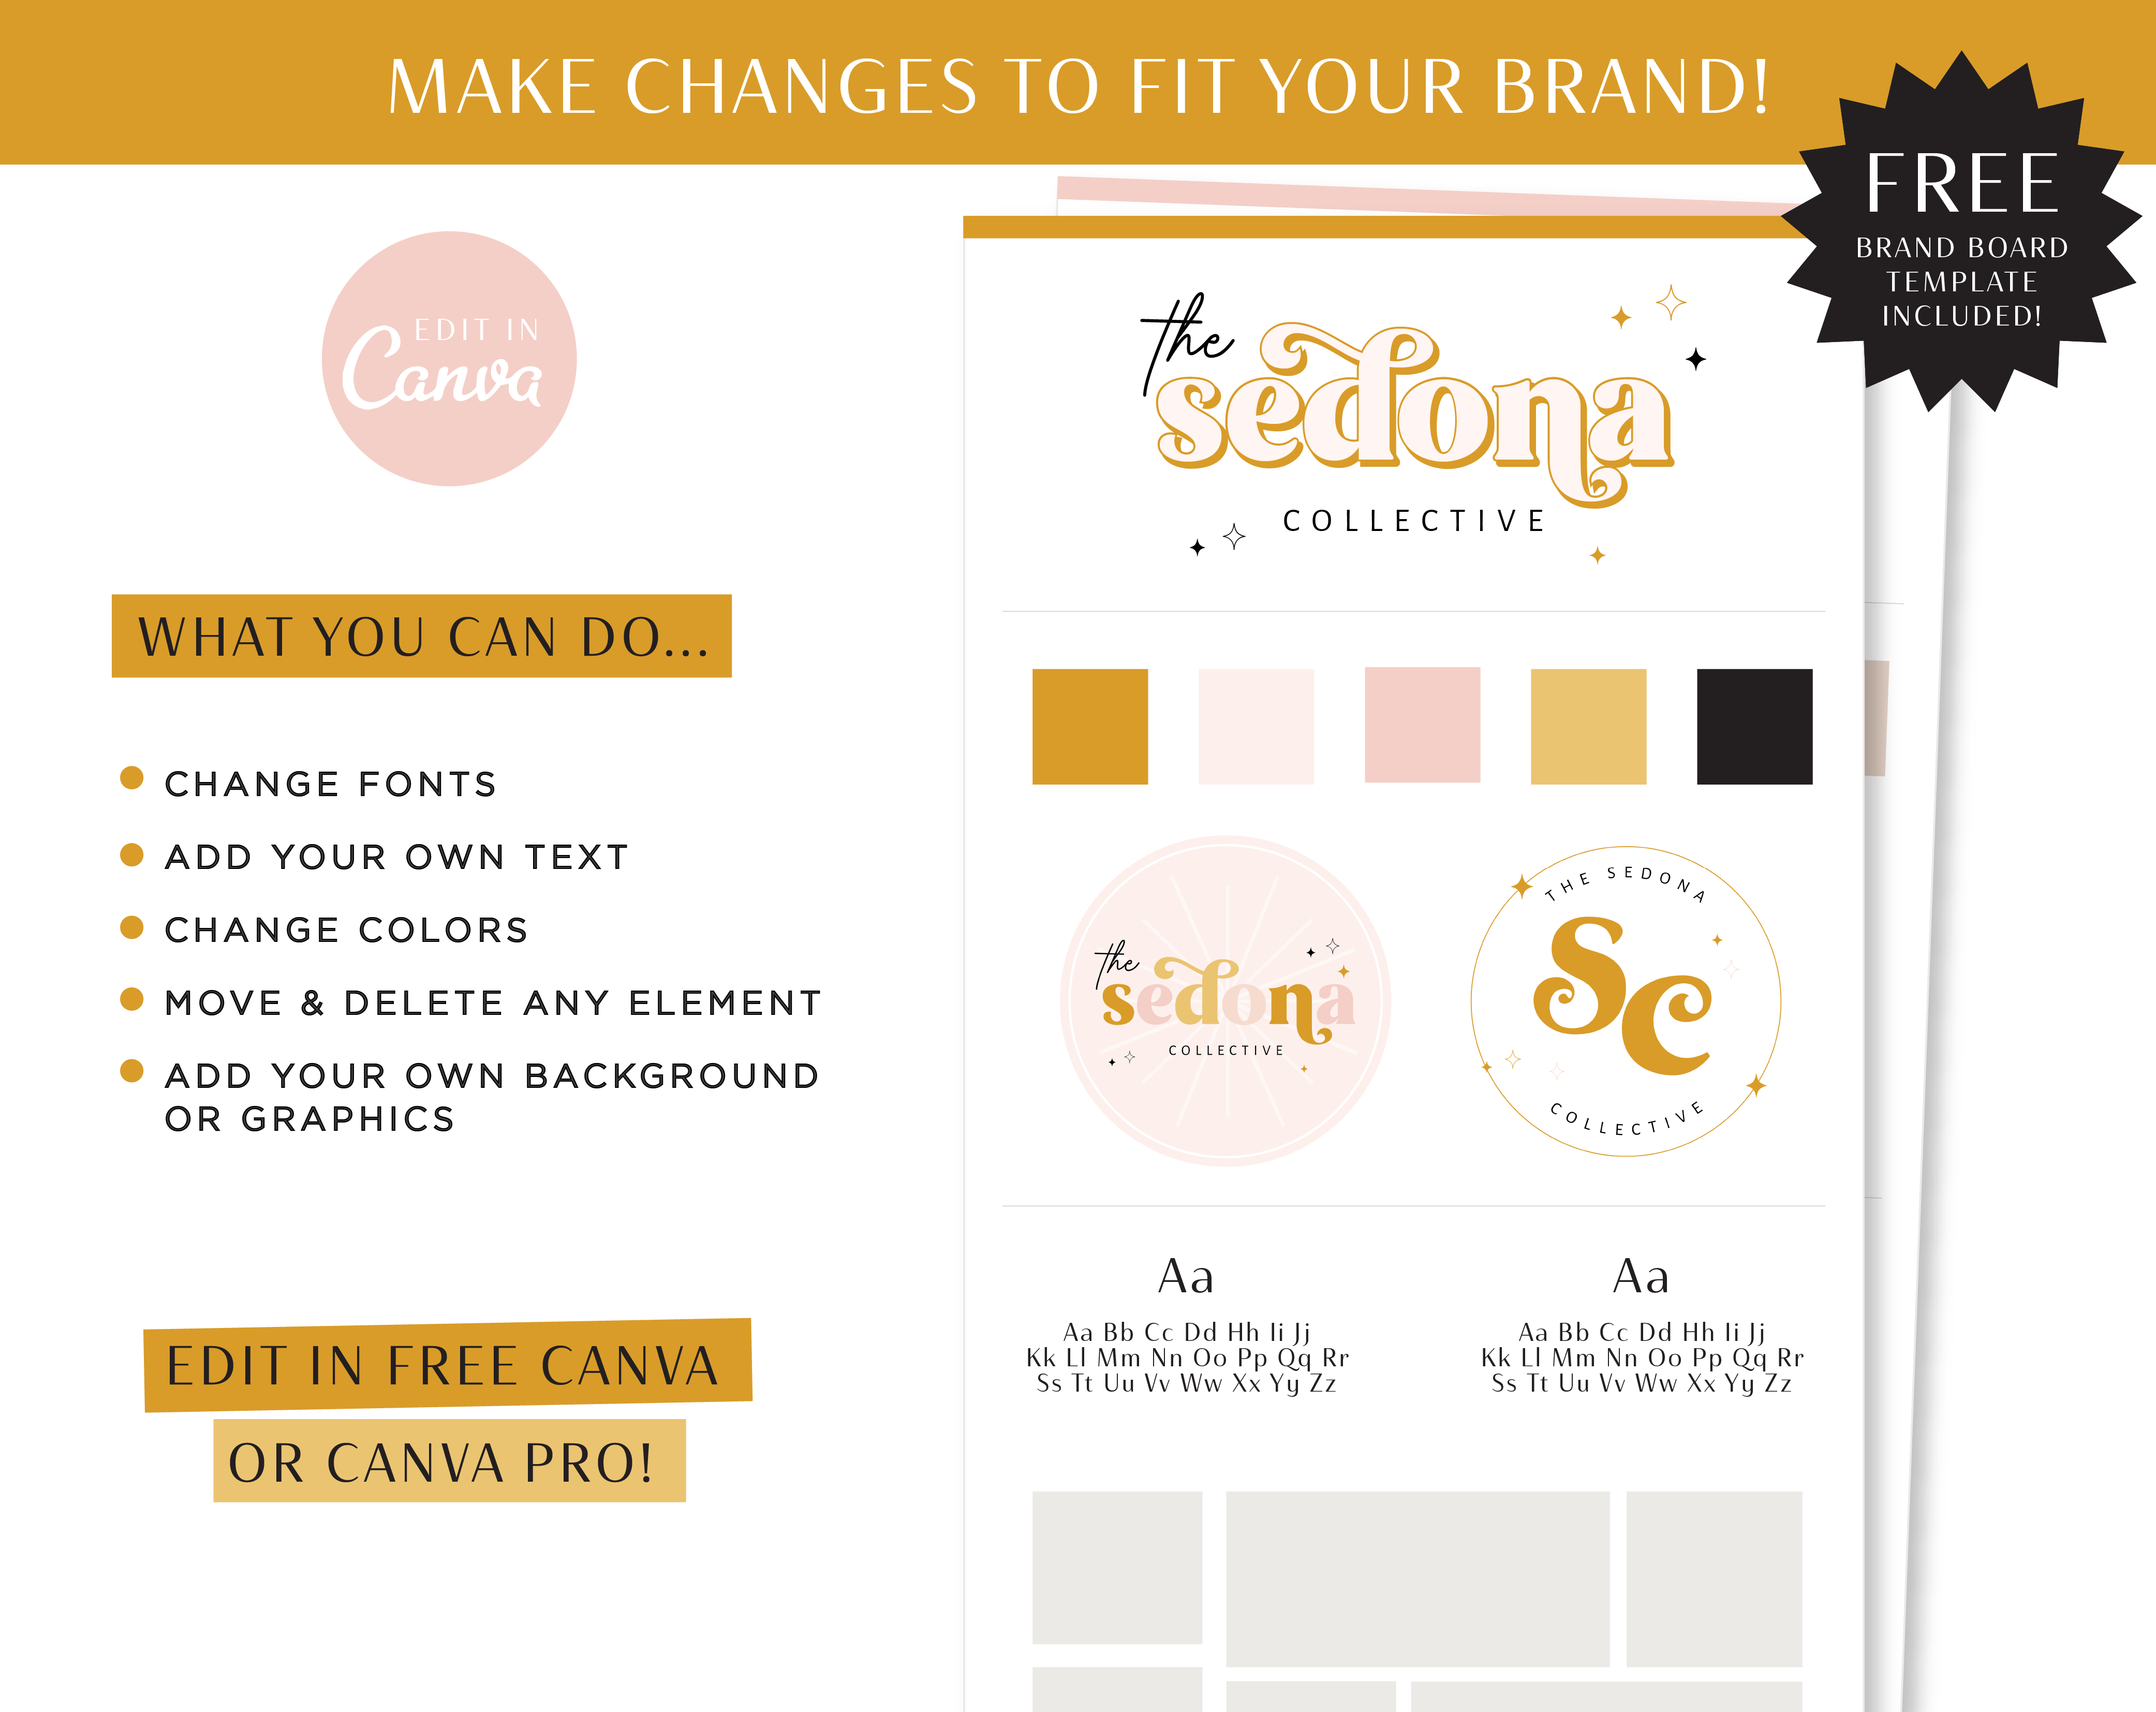 Semi-Customizable Brand Kits are for coaches, photographers, podcasters, online entrepreneurs, bloggers, content marketers, and any small business!